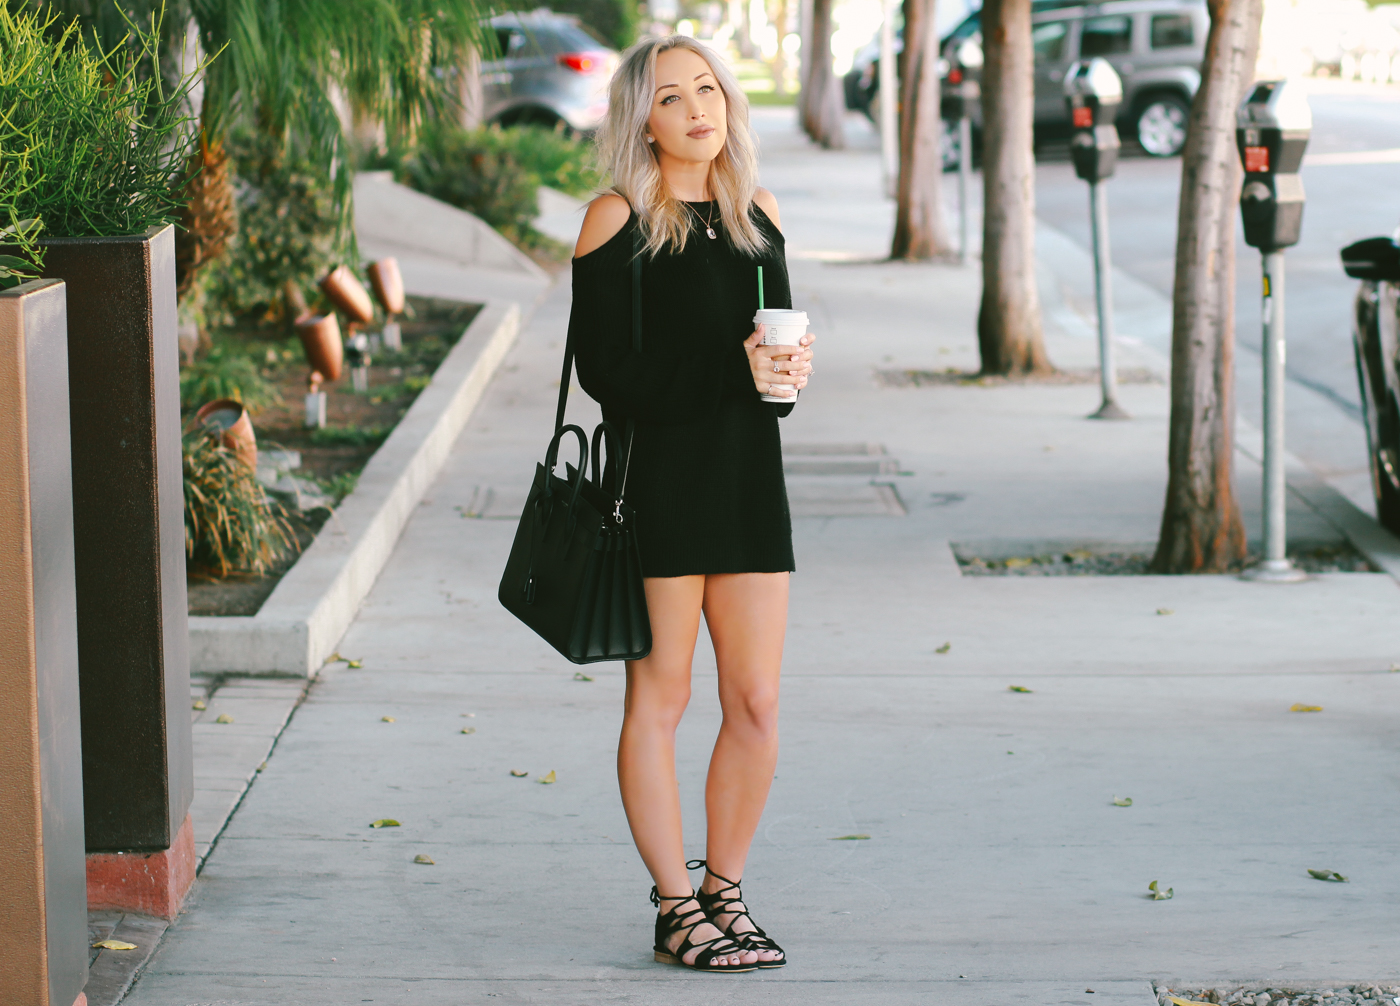 Blondie in the City | Coffee Stop | Cutoff Sweater Dress for Fall | Saint Laurent Sac De Jour Bag